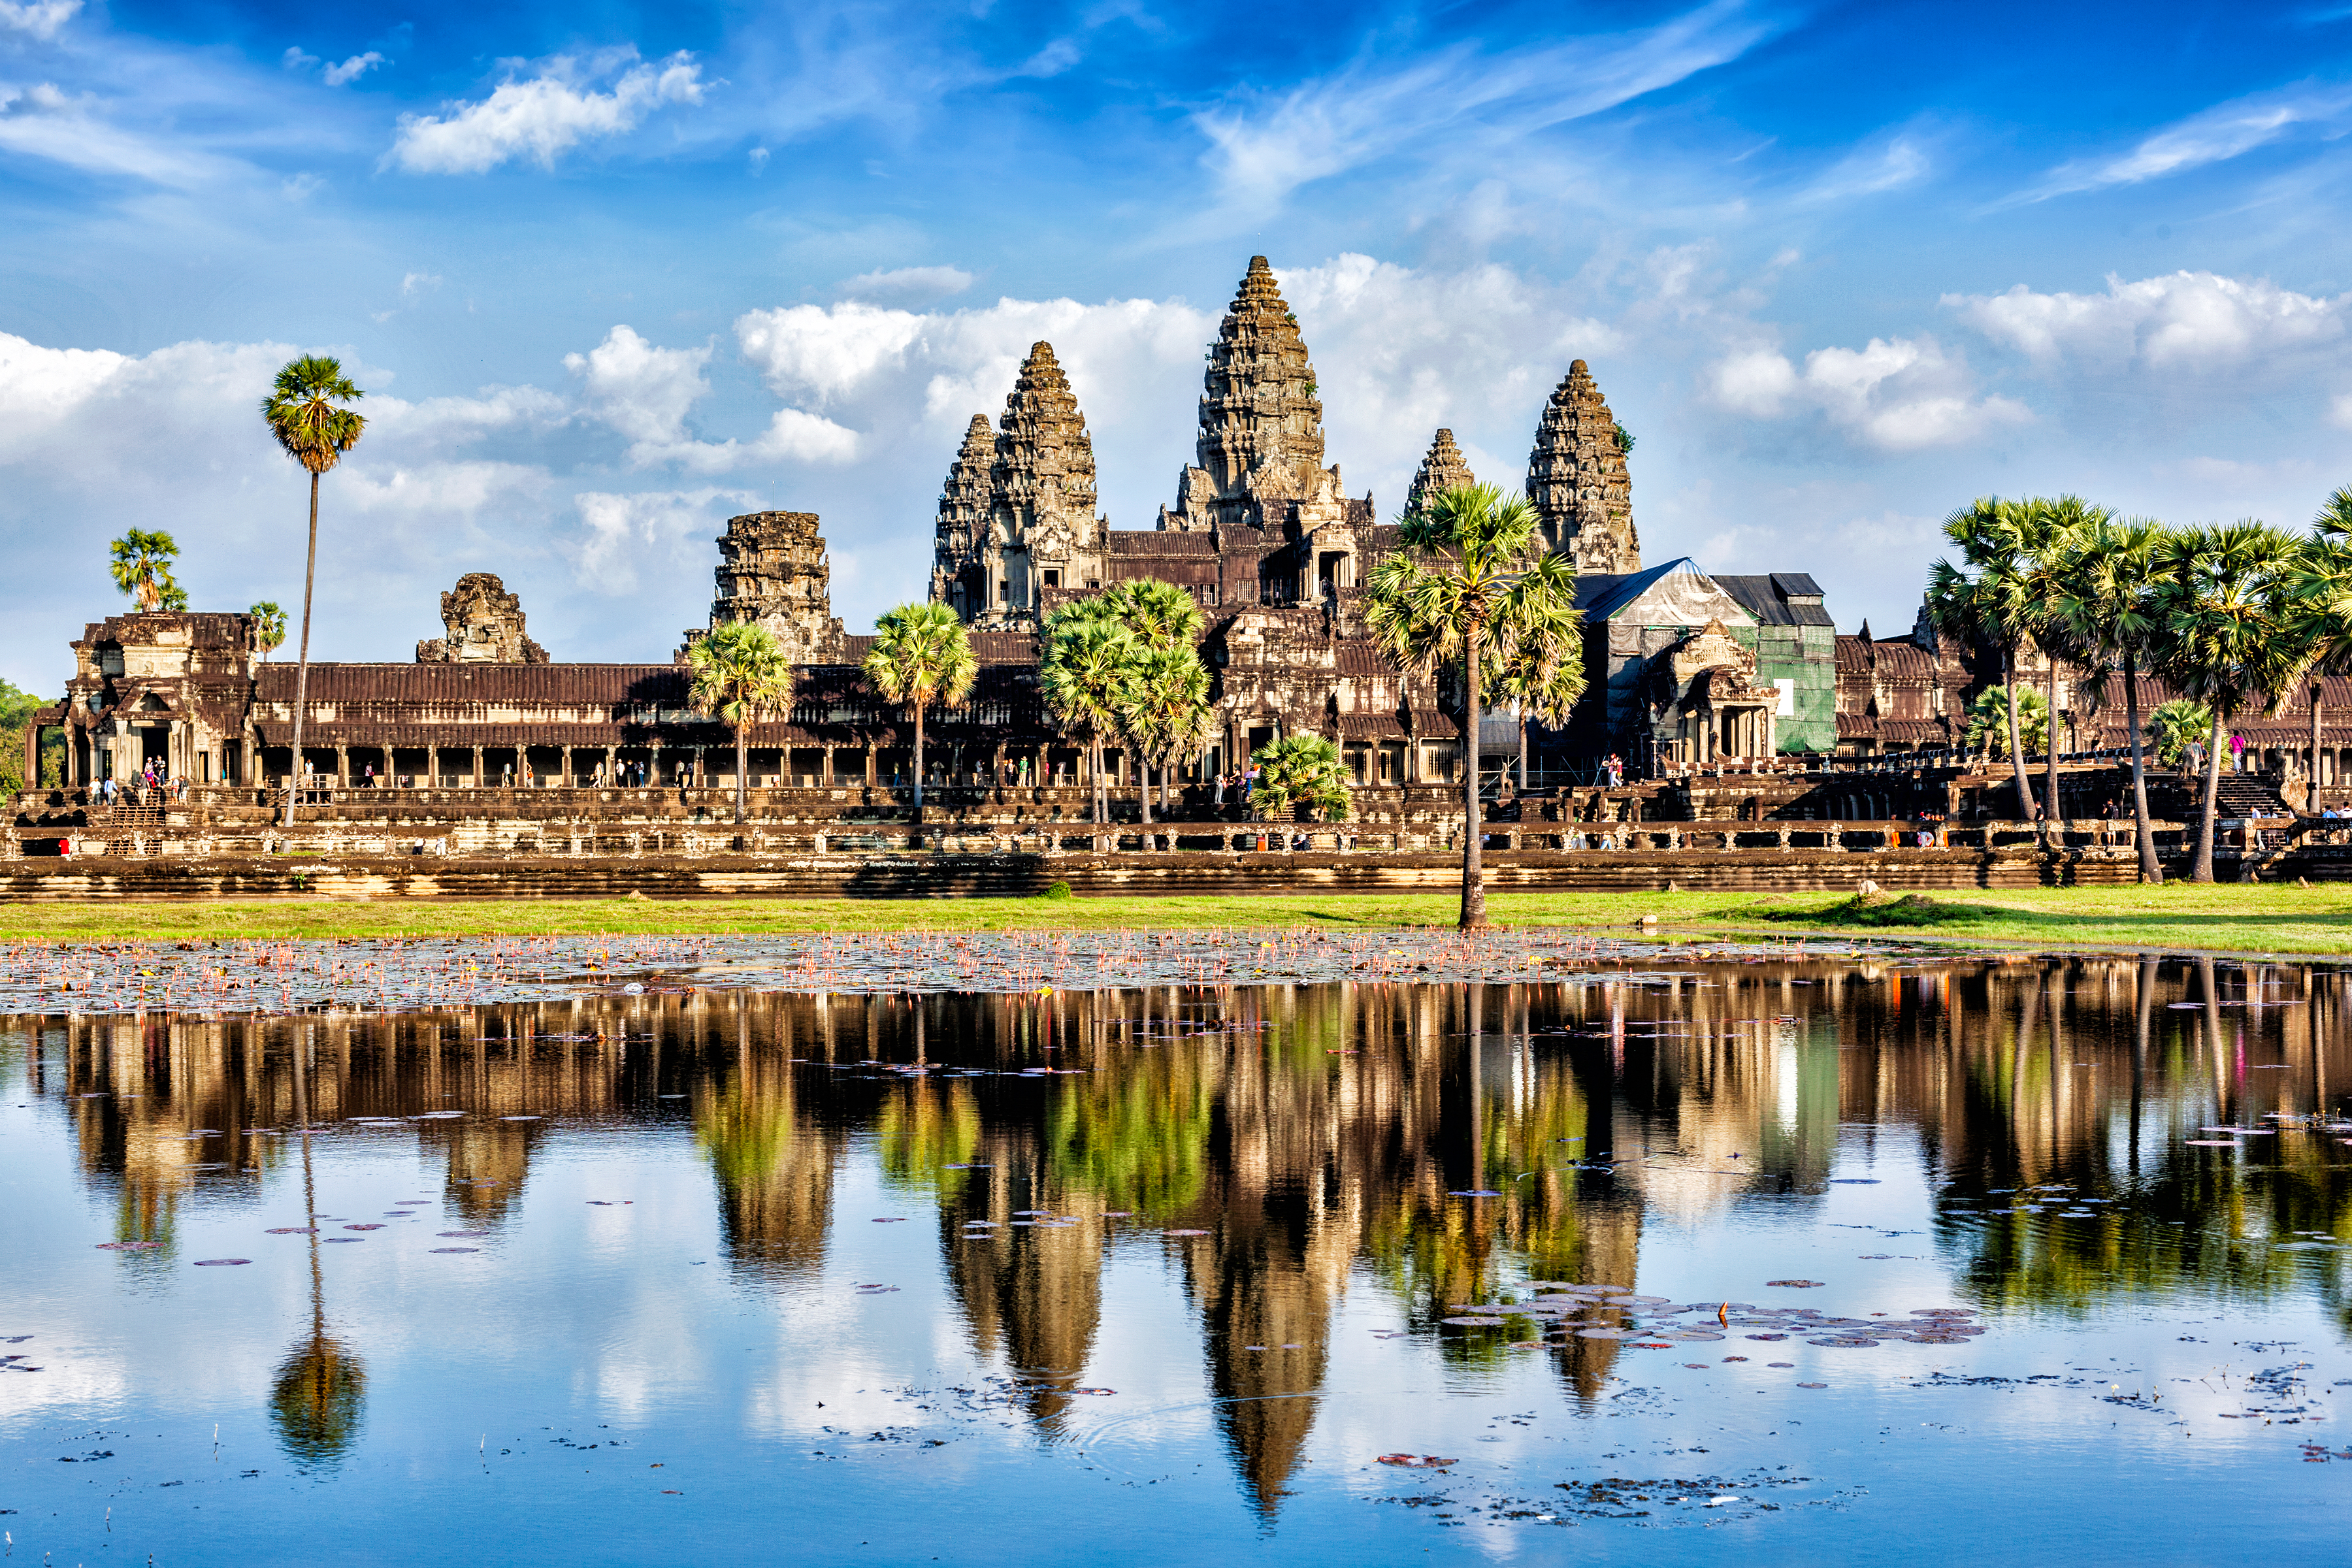 Check Out These Temples in Asia - Angkor Wat in Siem Riep, Cambodia